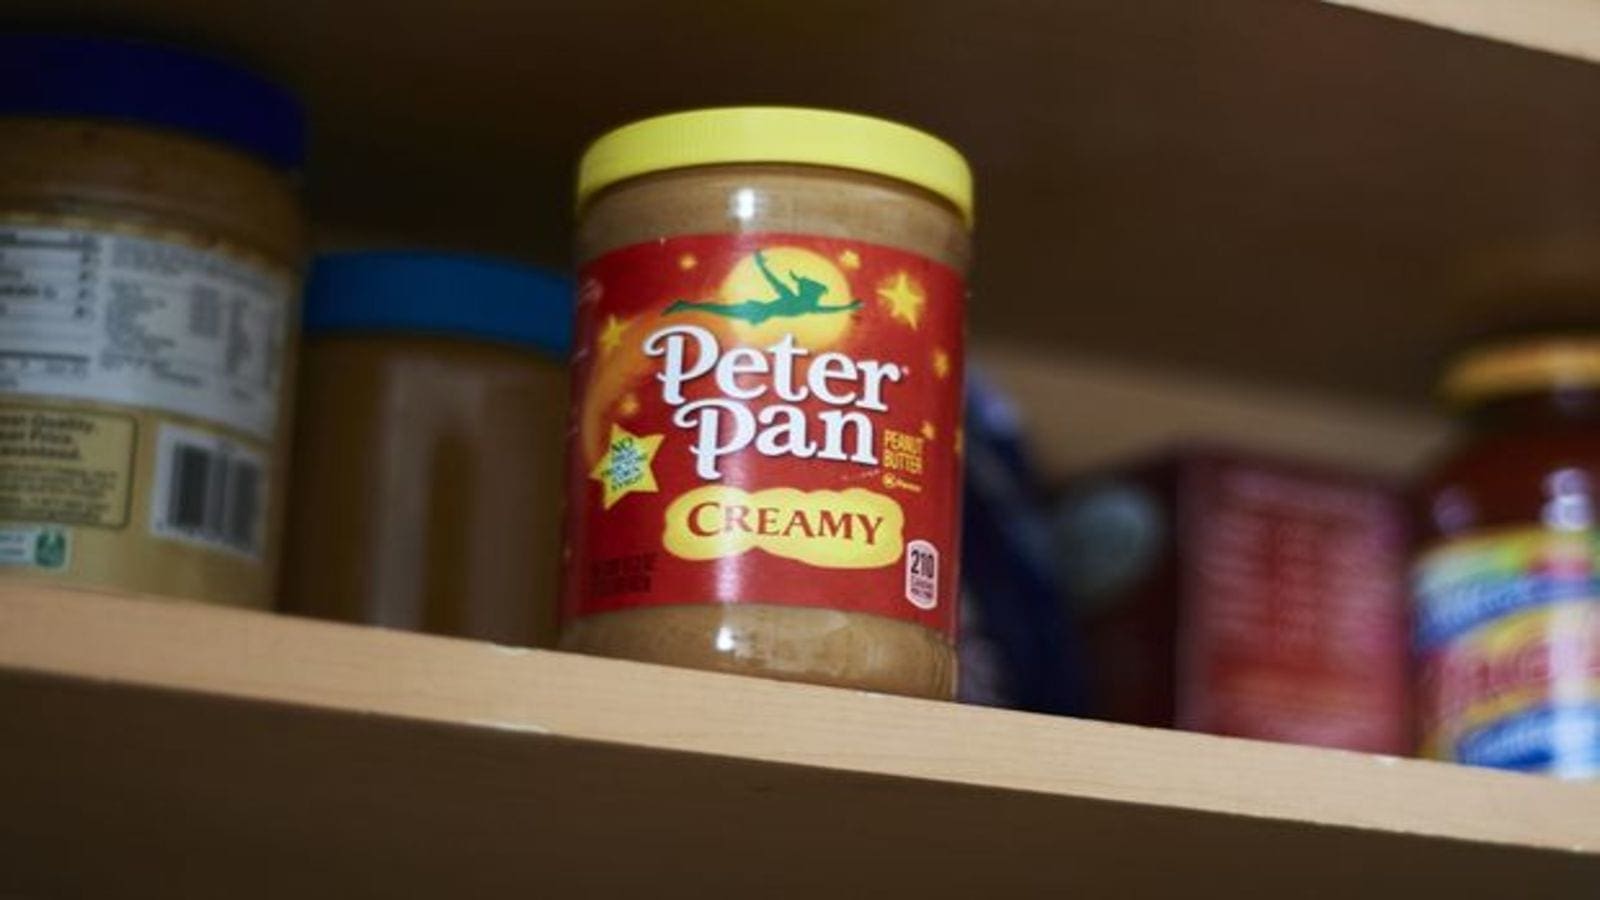 American consumer packaged goods company Post Holdings to acquire Peter Pan peanut butter brand from Conagra